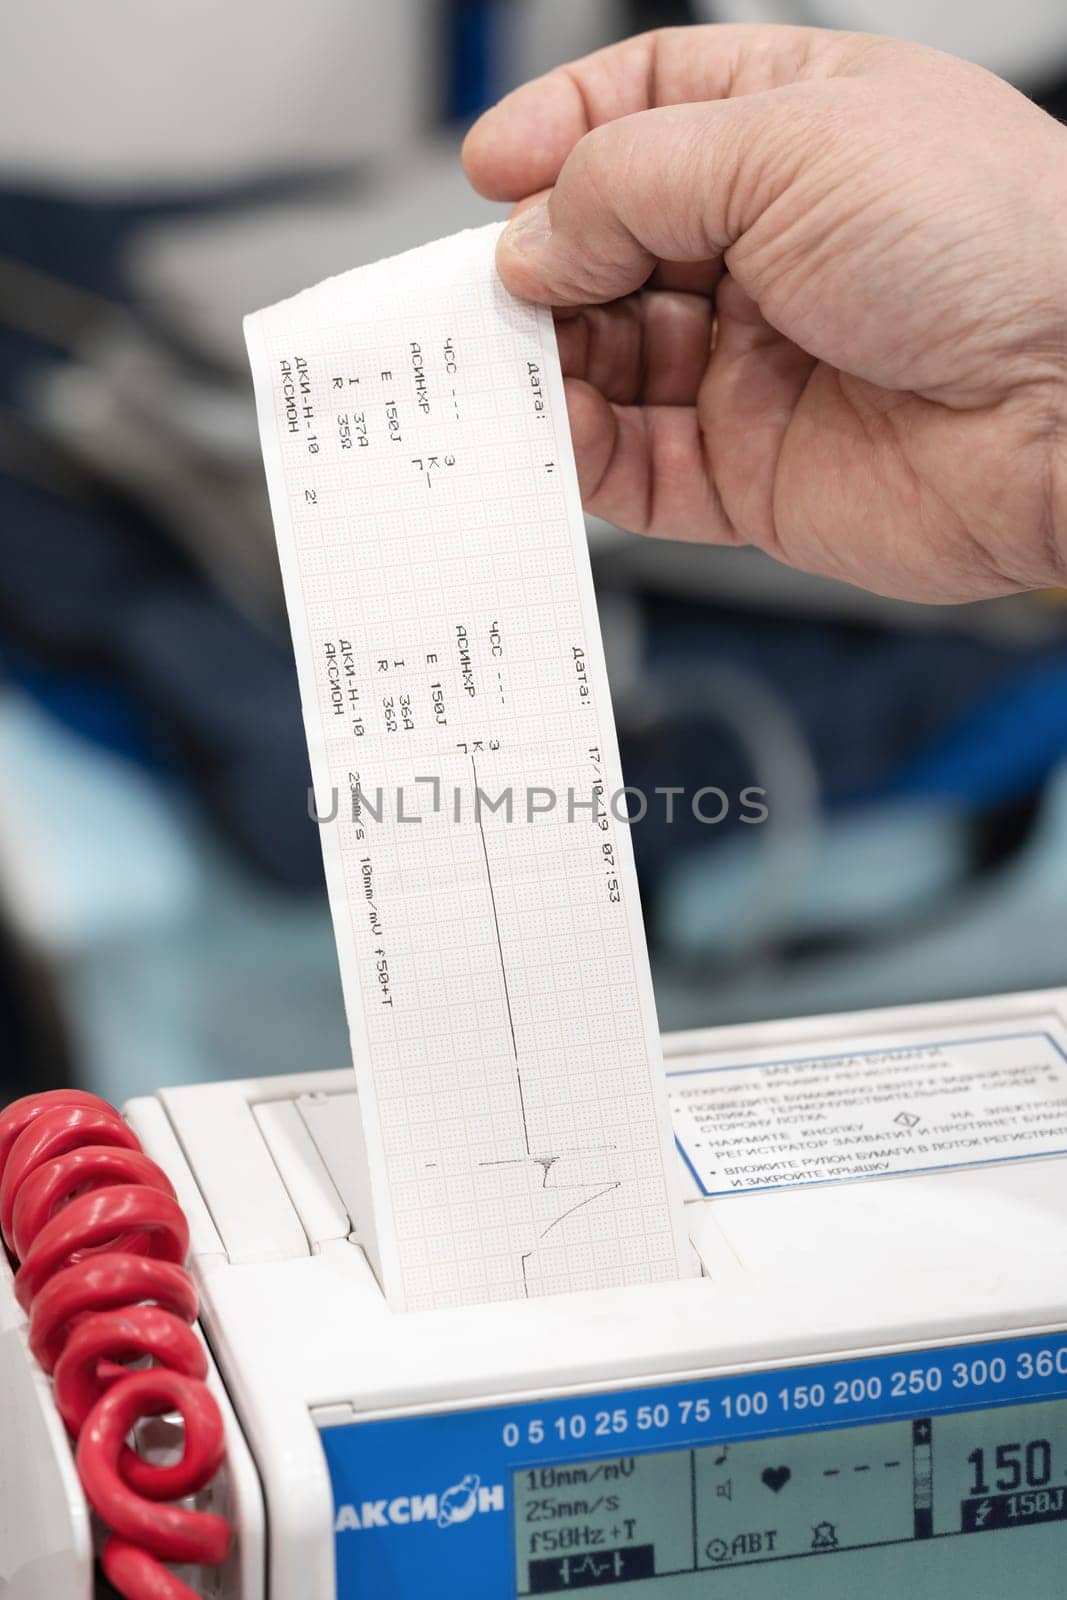 Doctor receives data from thermal printer at defibrillator monitor DKI-N-10 Axion for life-threatening cardiac dysrhythmias, non-perfusing ventricular tachycardia. Kamchatka, Russia - Oct 17, 2019